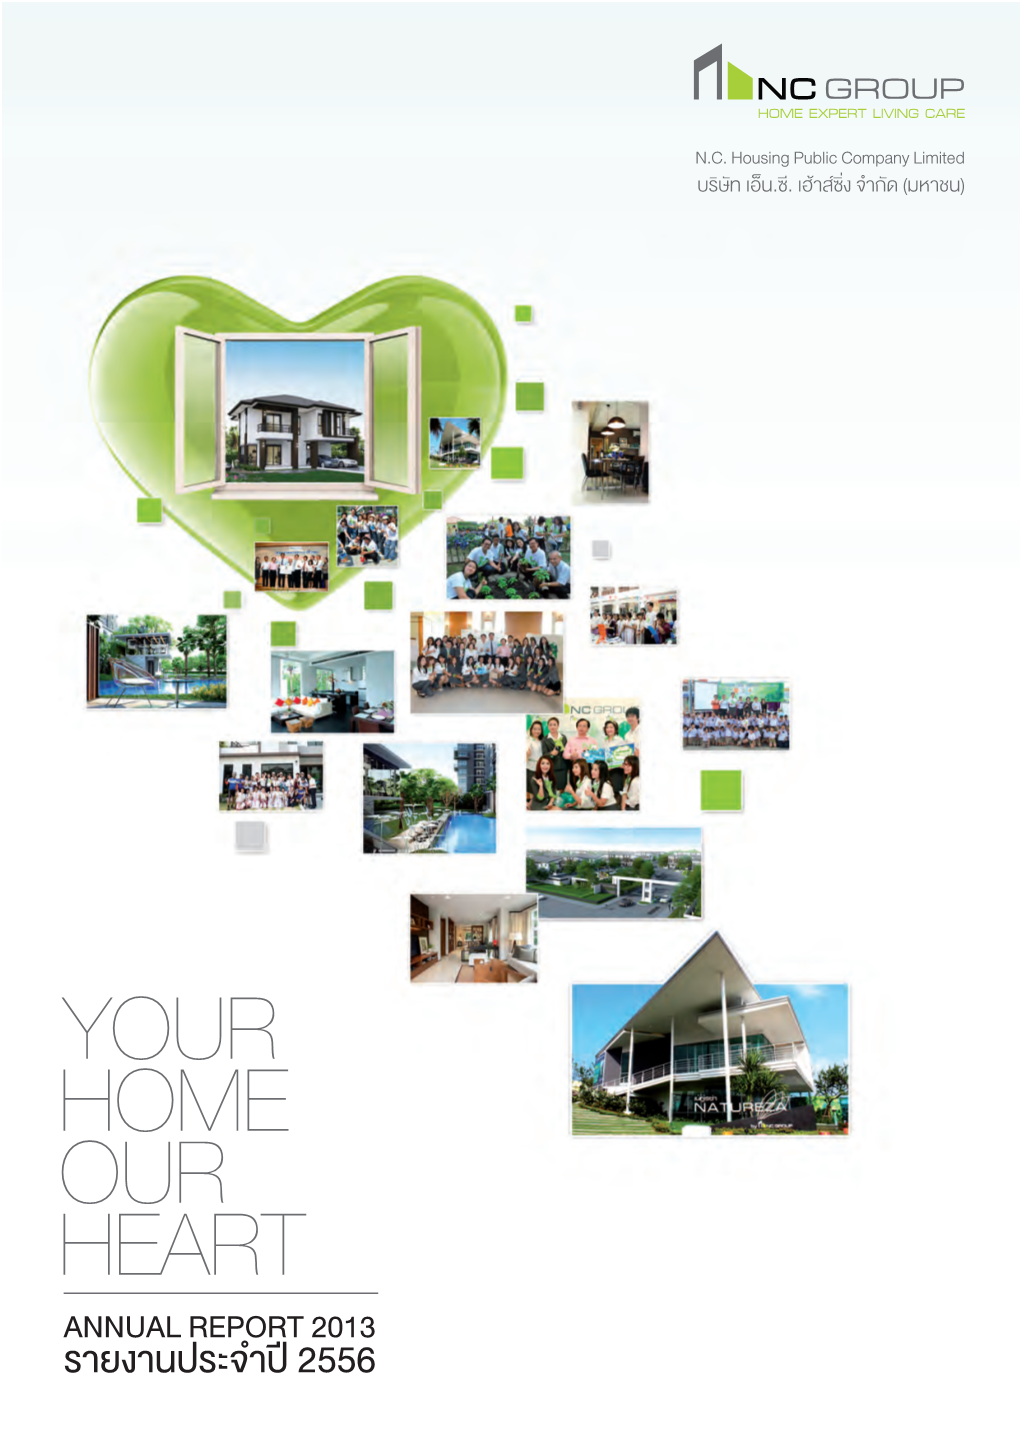 NCH: N. C. Housing Public Company Limited | Annual Report 2013